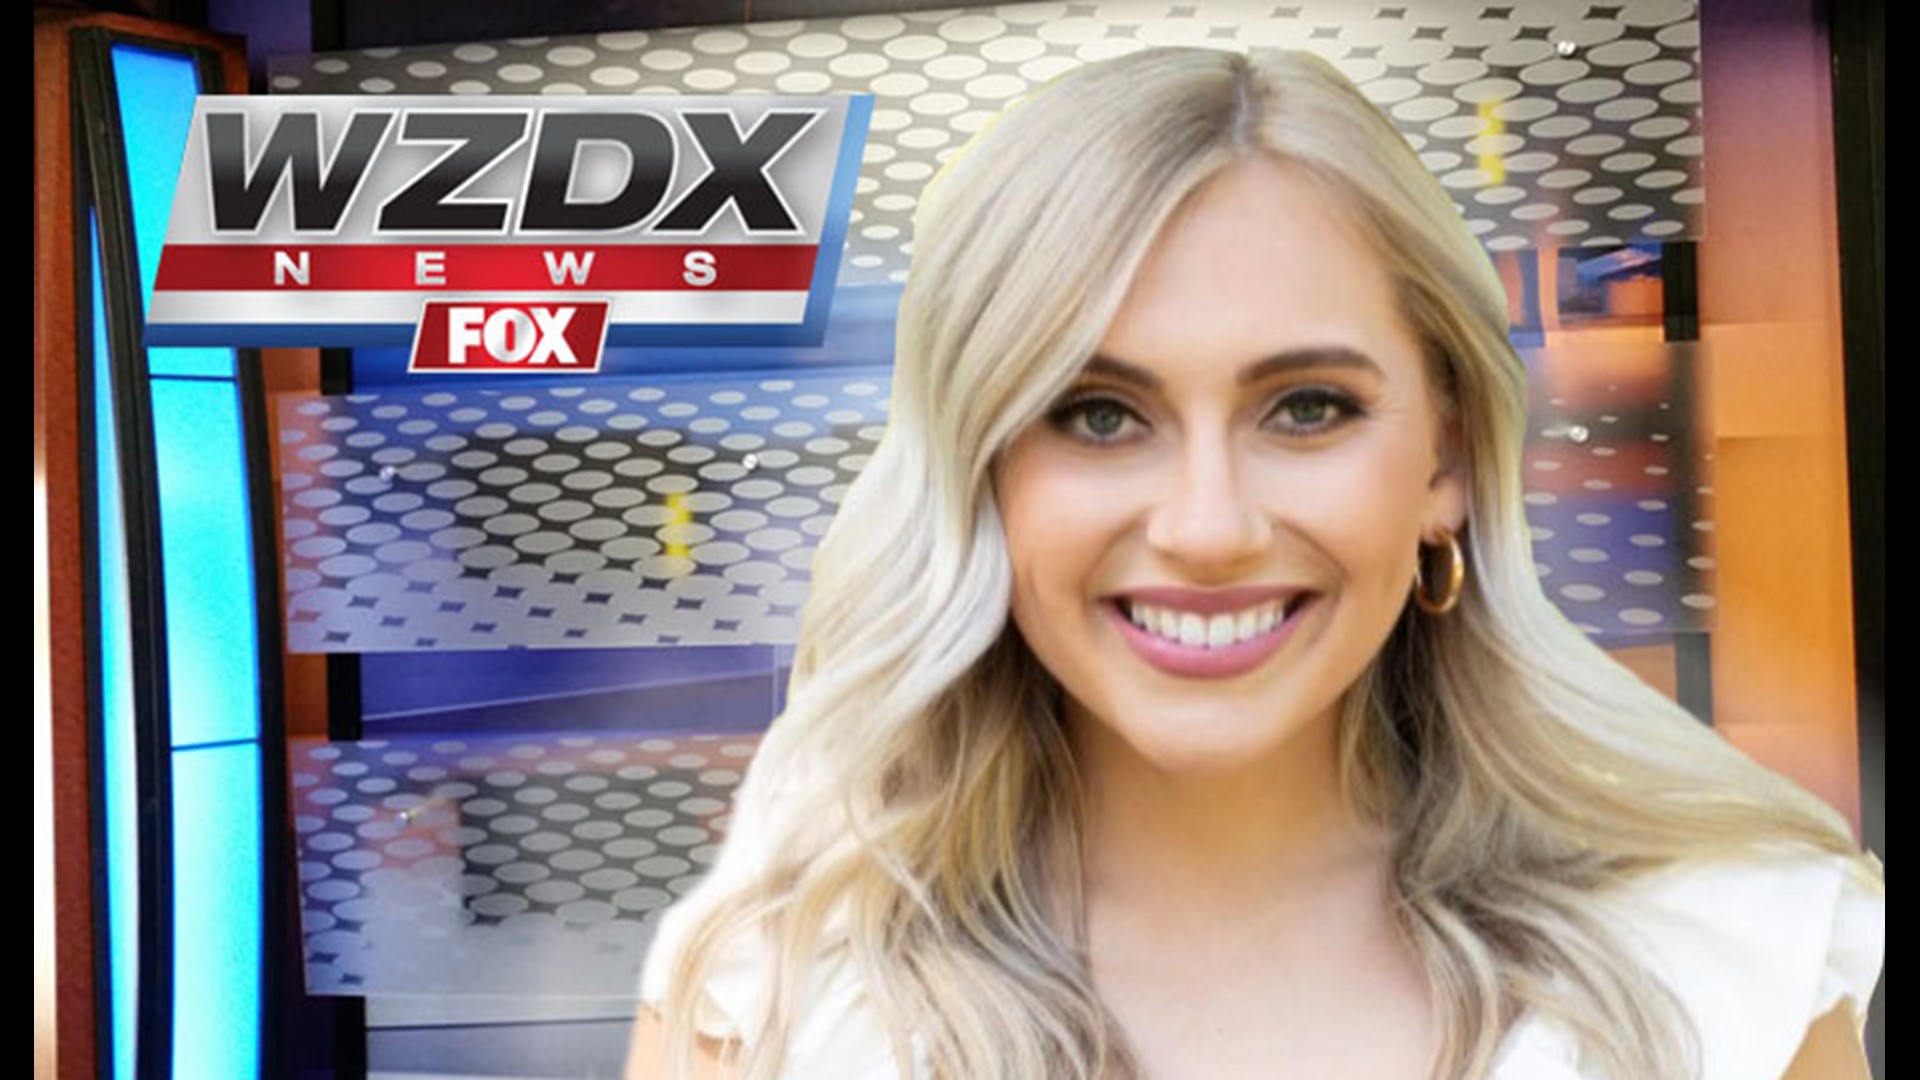 Julia Smith is a multi-skilled journalist at WZDX.